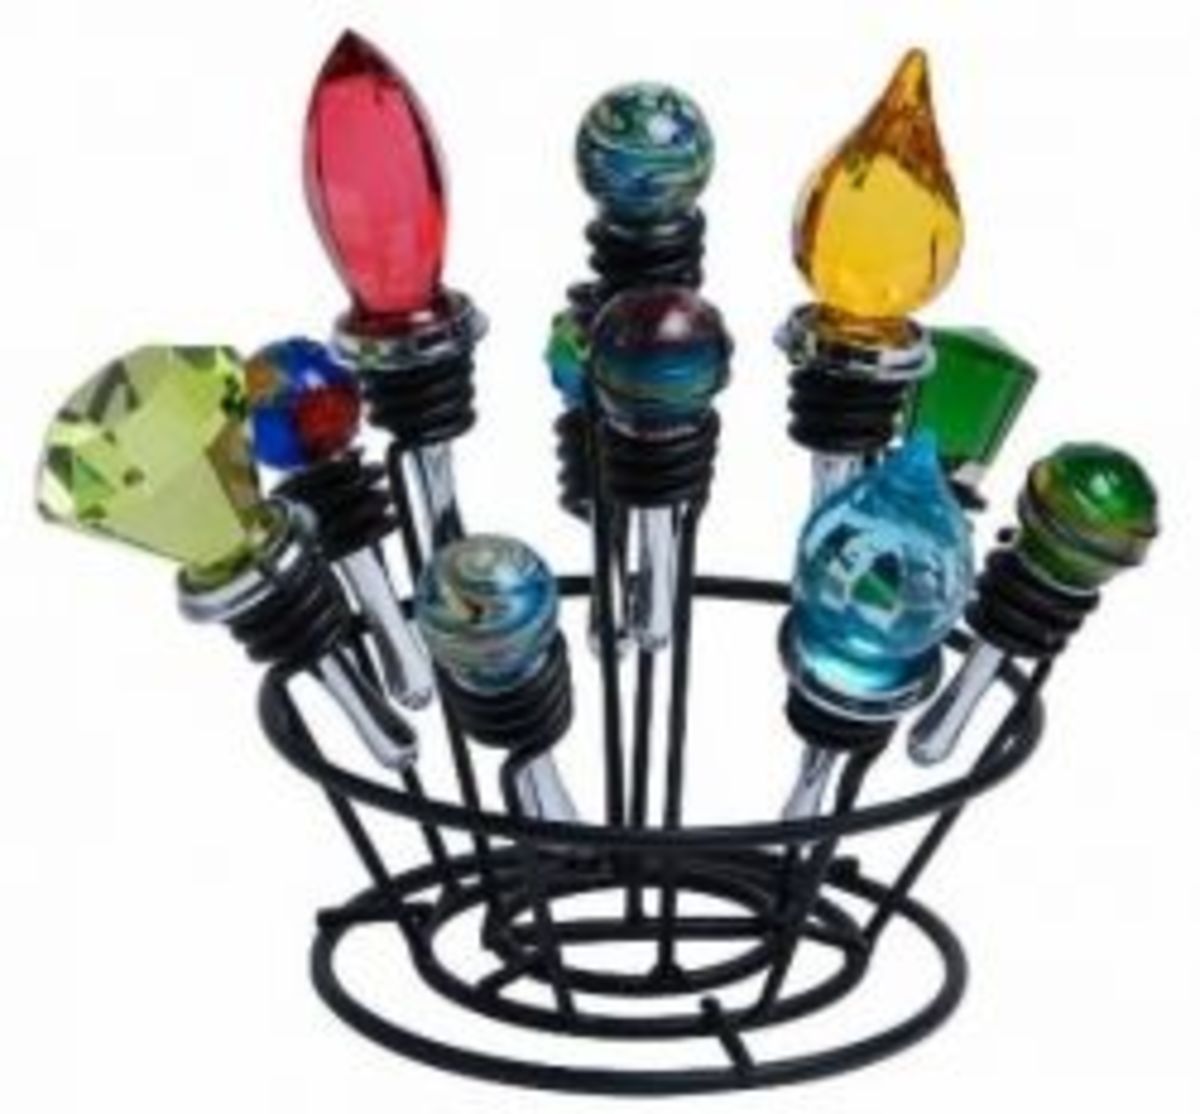 How to Display Wine Bottle Stoppers